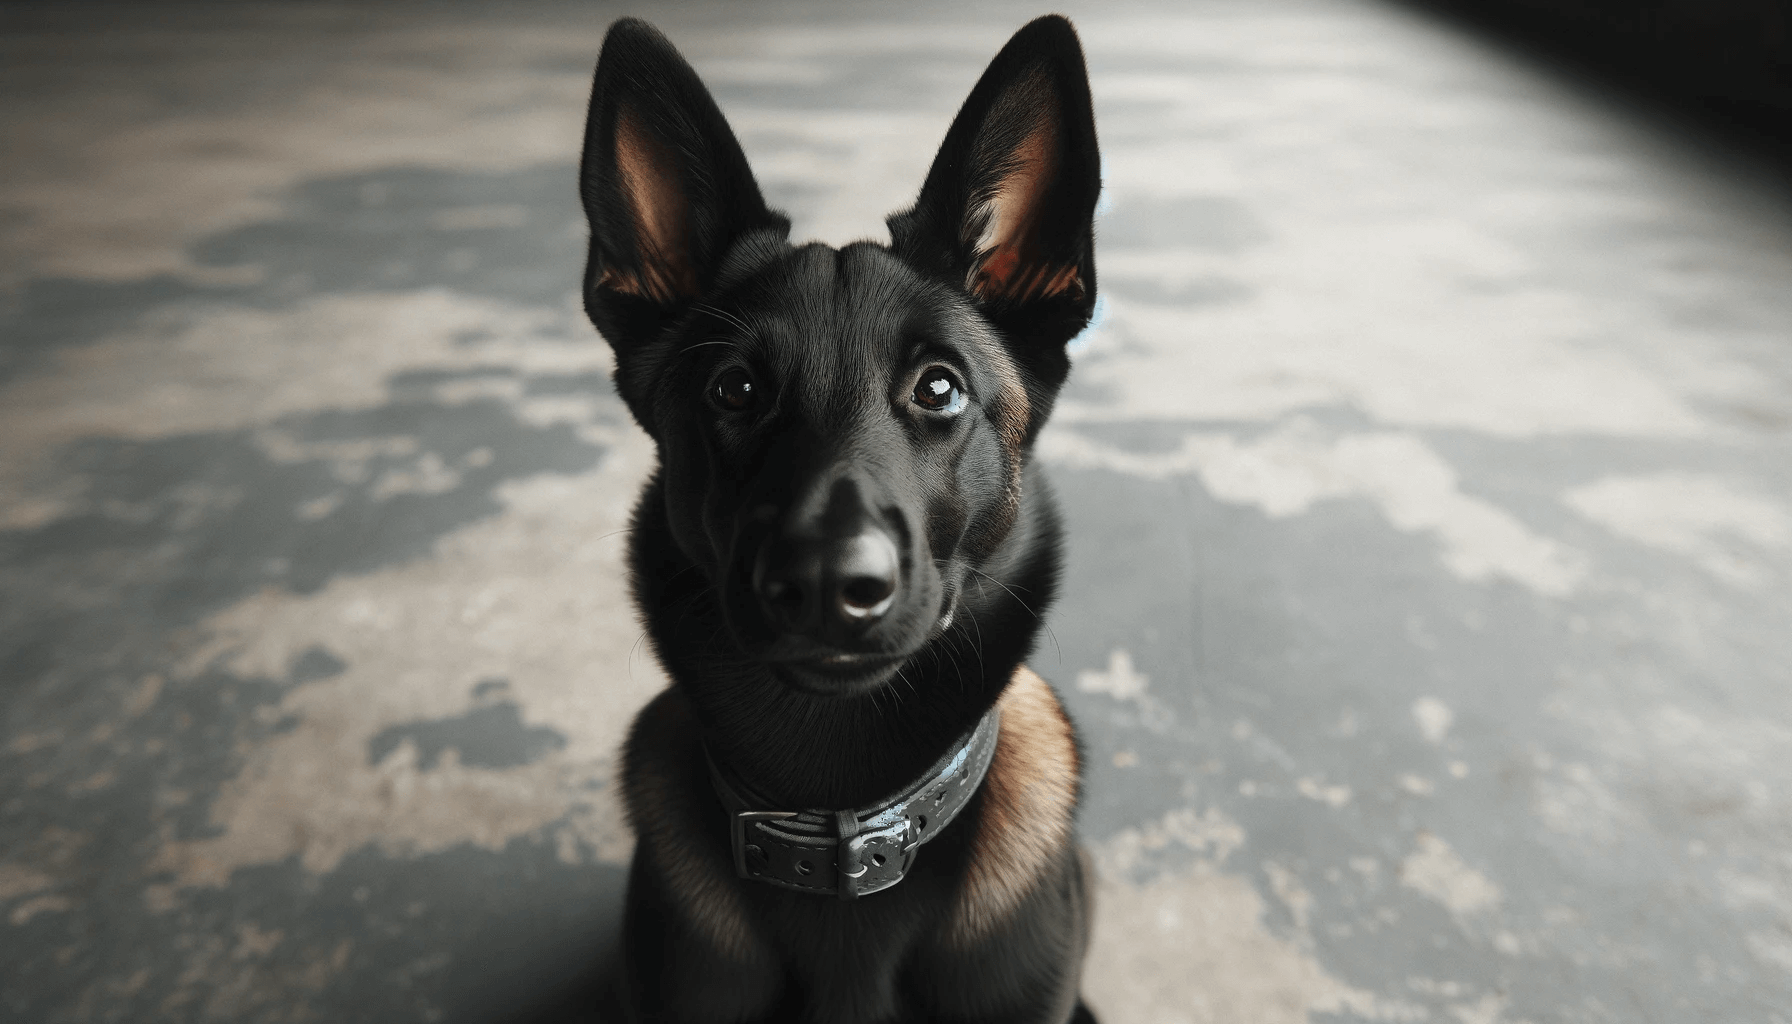 Rare Black Belgian Malinois sitting on a concrete floor, looking directly at the camera with its ears fully erect.